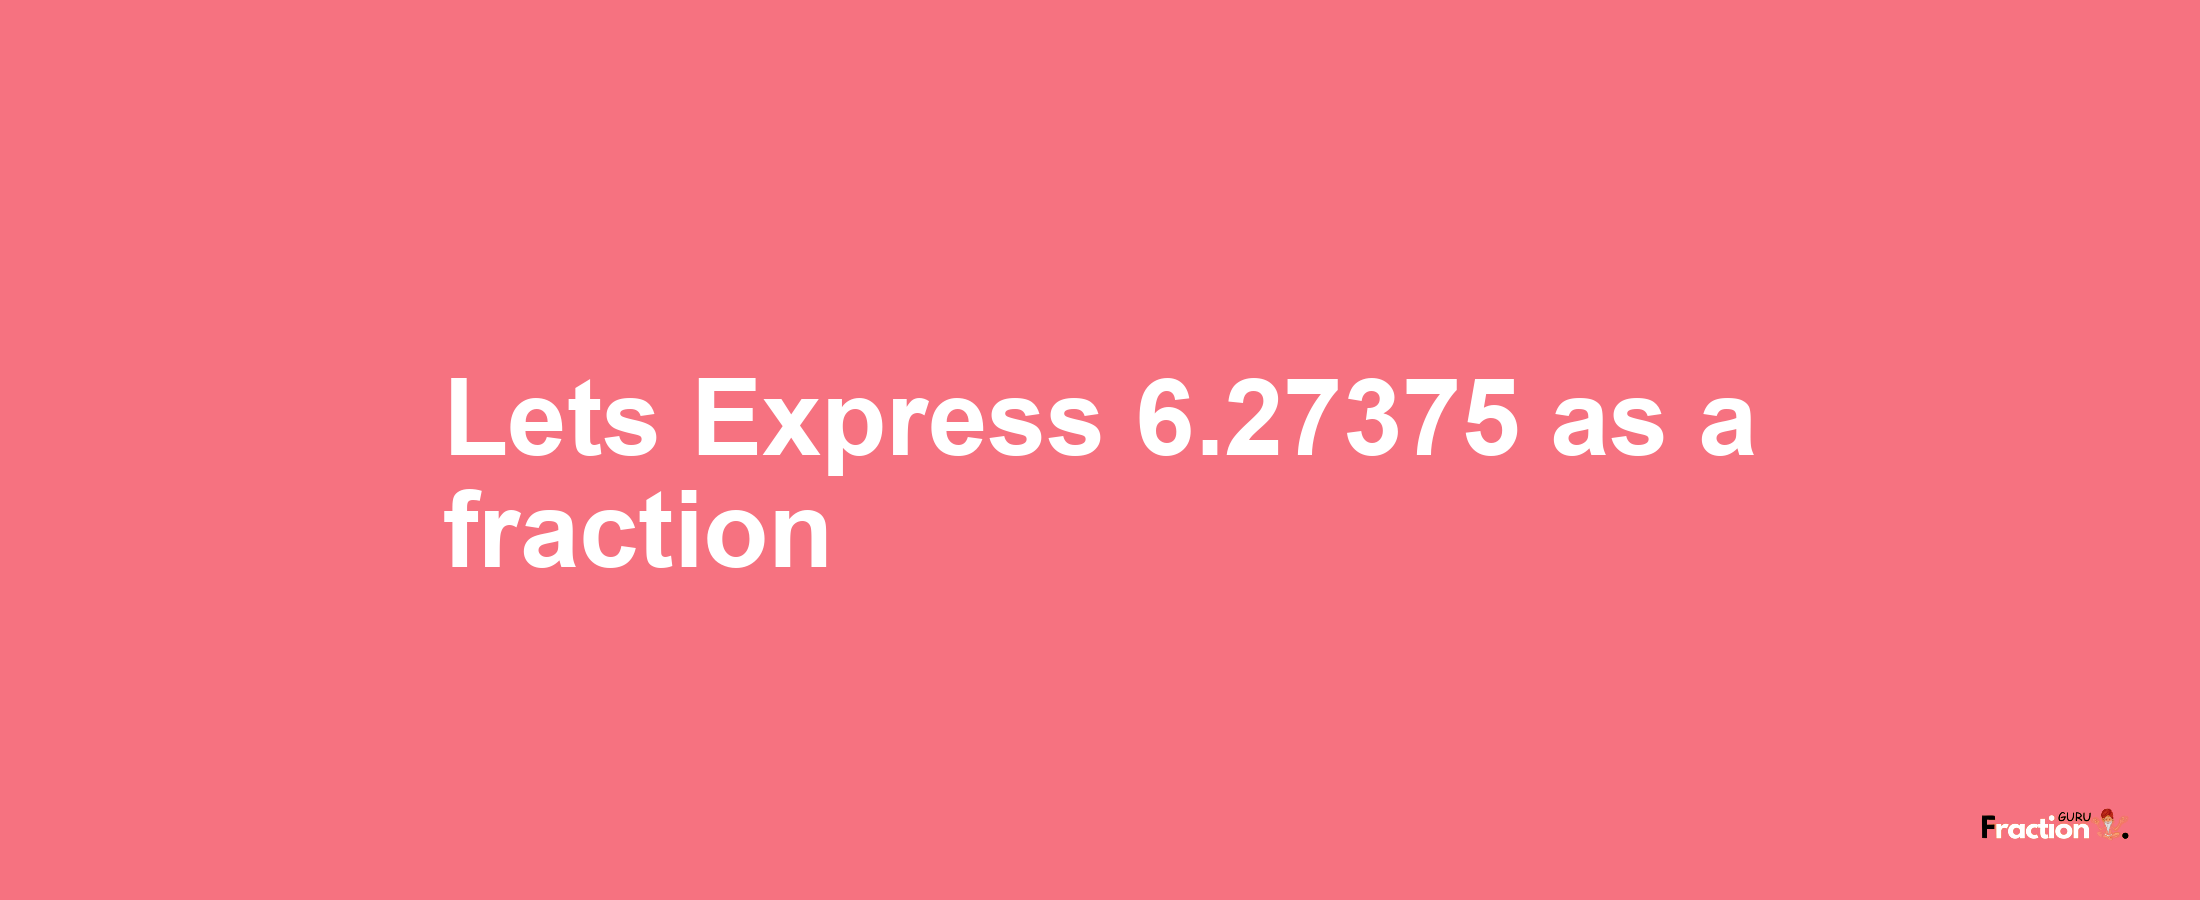 Lets Express 6.27375 as afraction